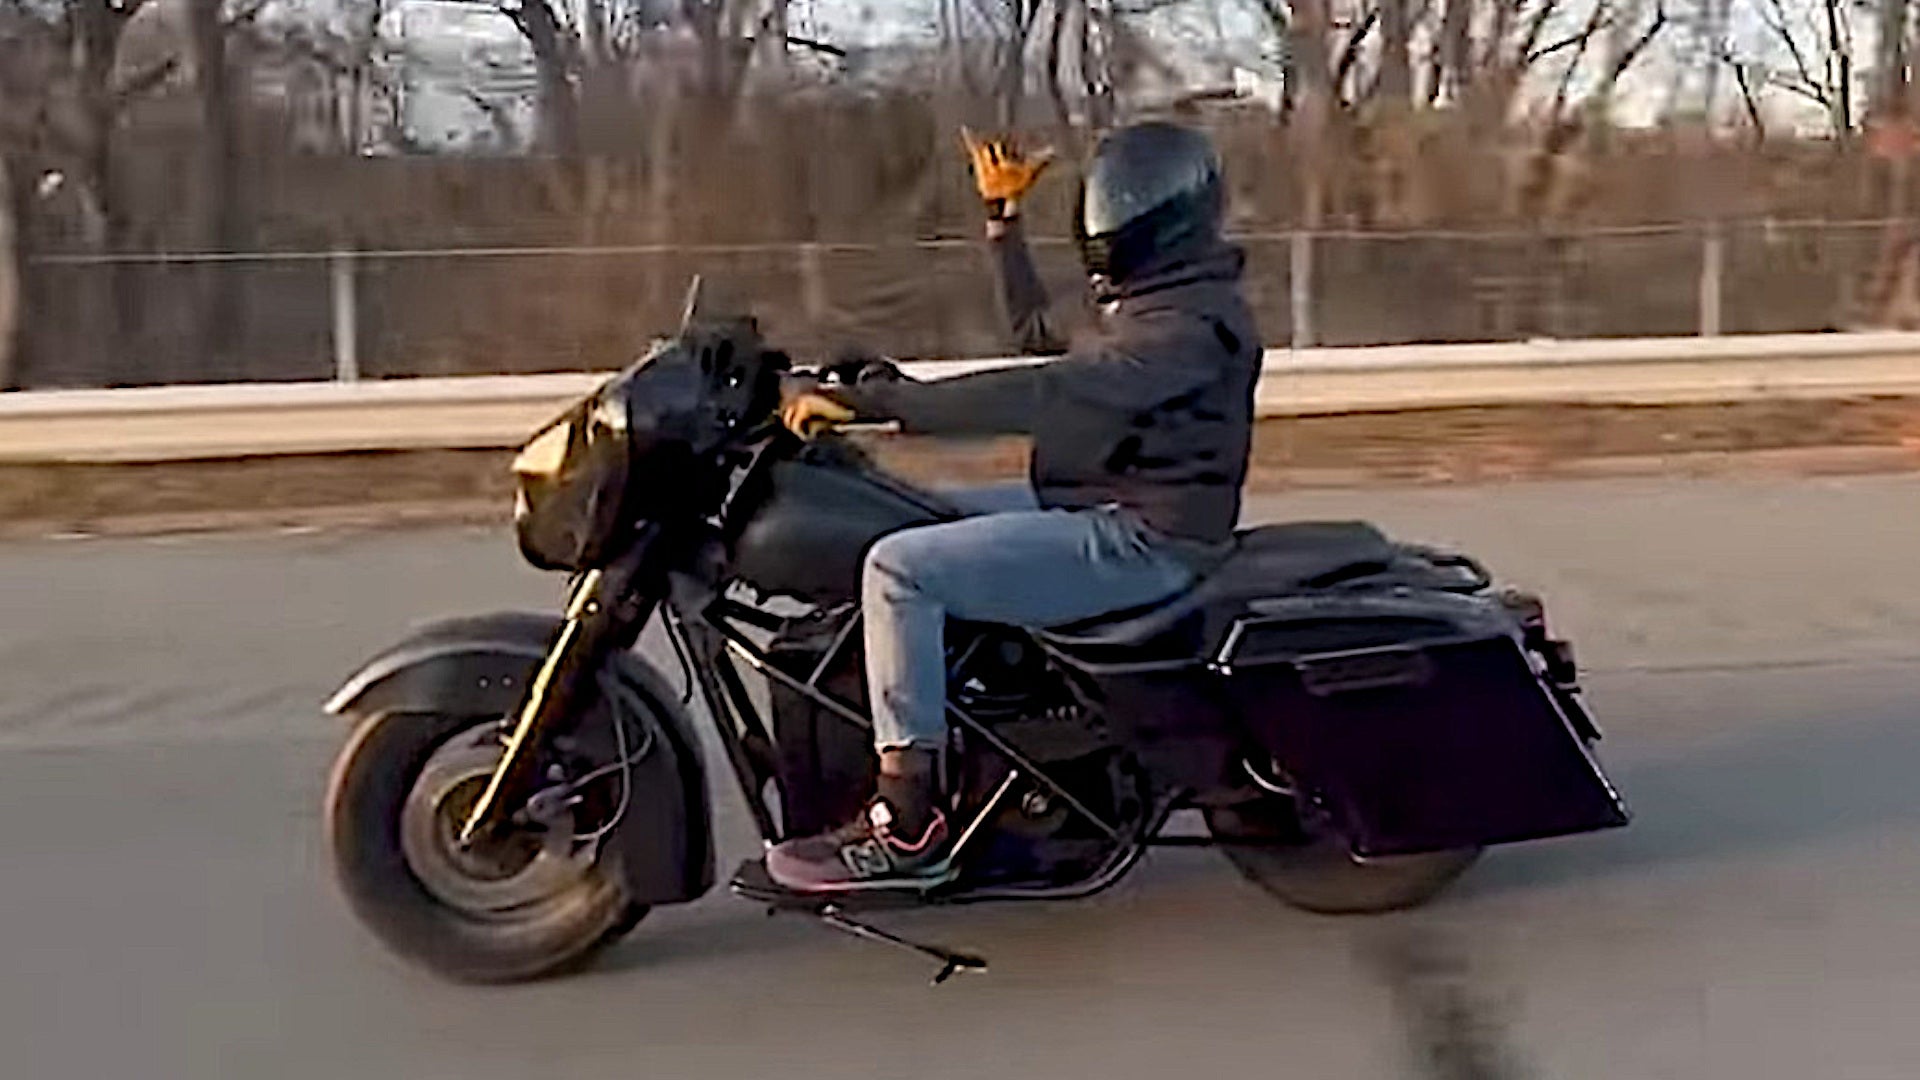 YouTuber Builds Electric Harley-Davidson That’s Too Quiet for Its Own Good